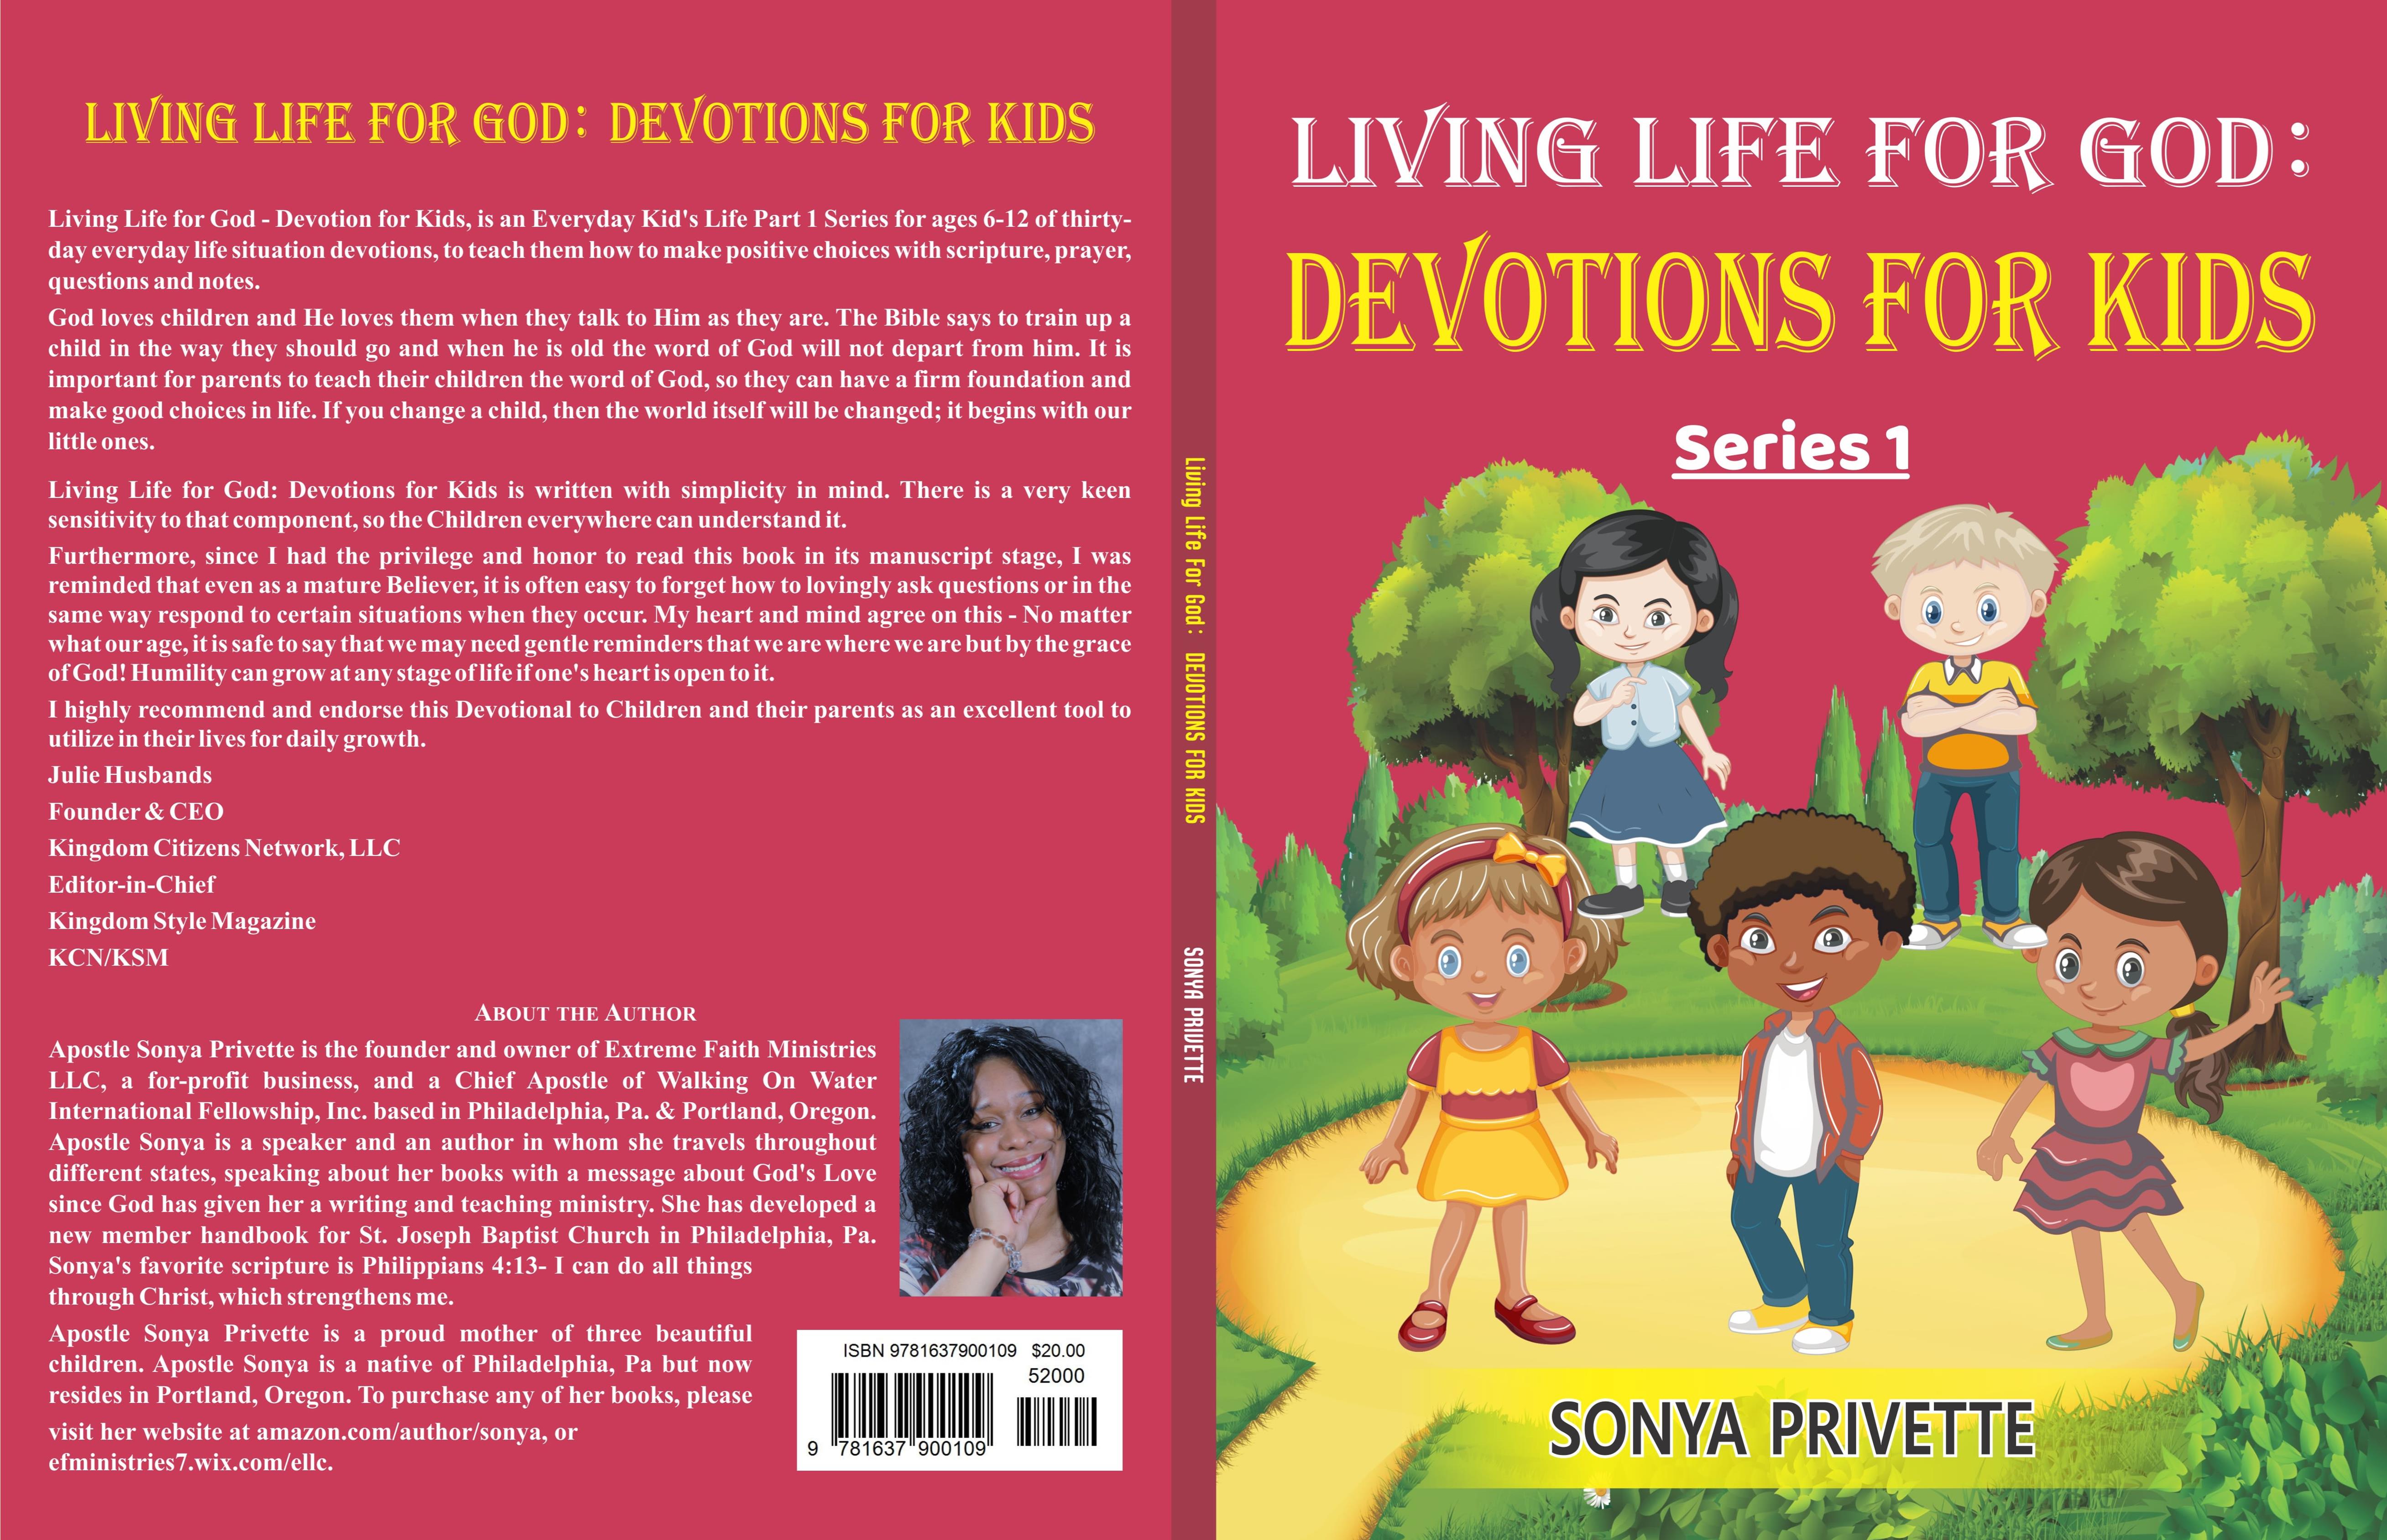 Living Life For God: Devotions For Kids Series 1 cover image